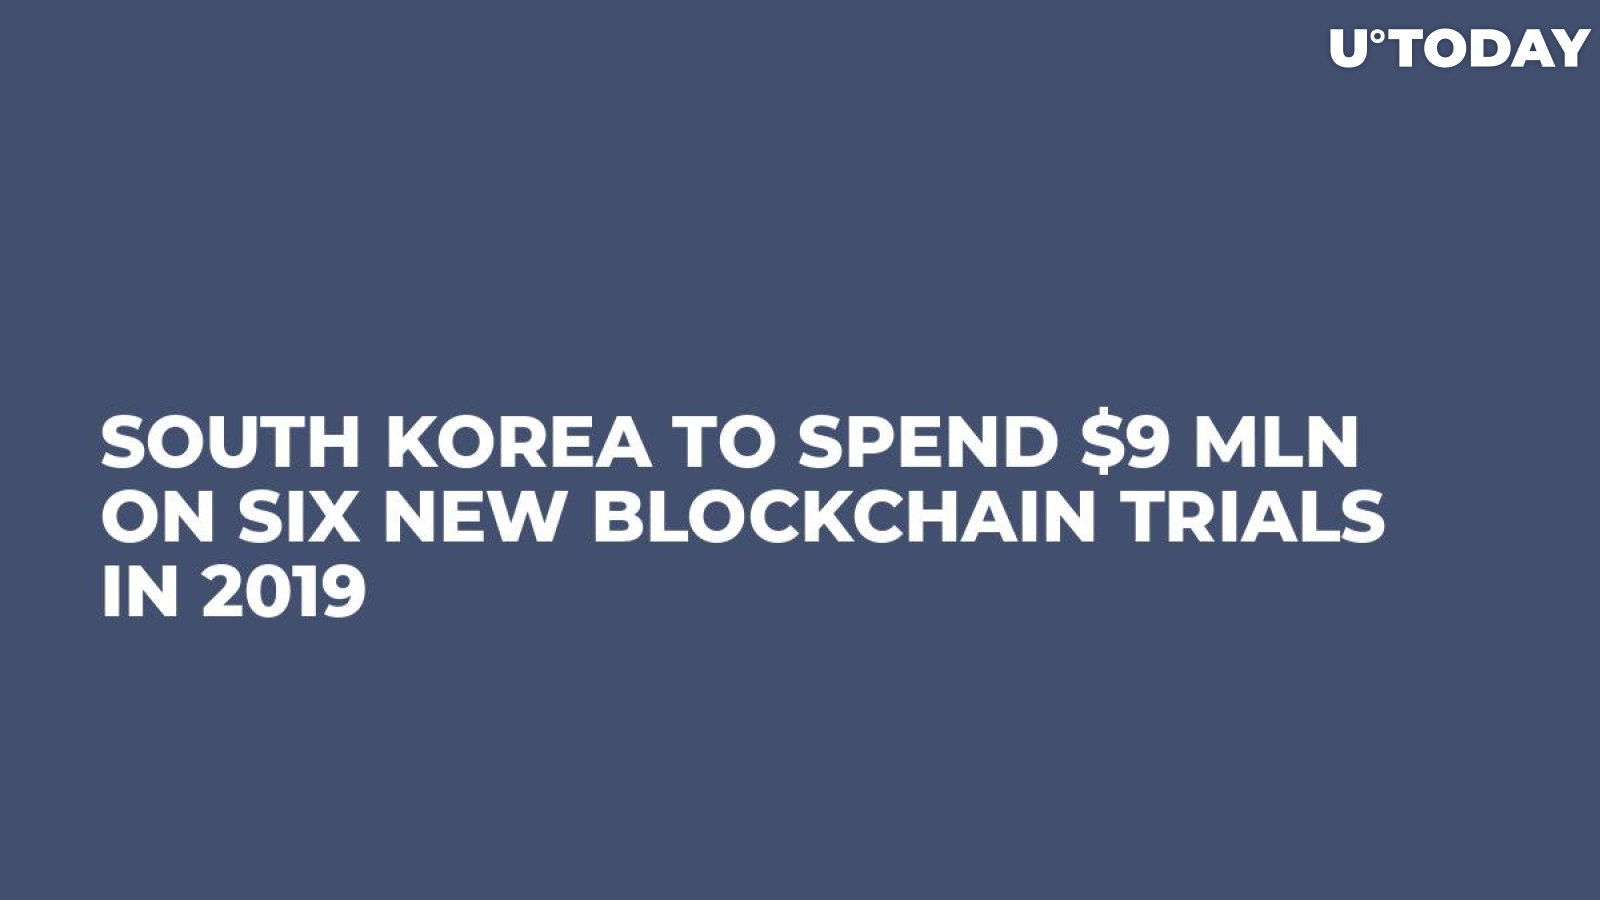 South Korea to Spend $9 Mln on Six New Blockchain Trials in 2019